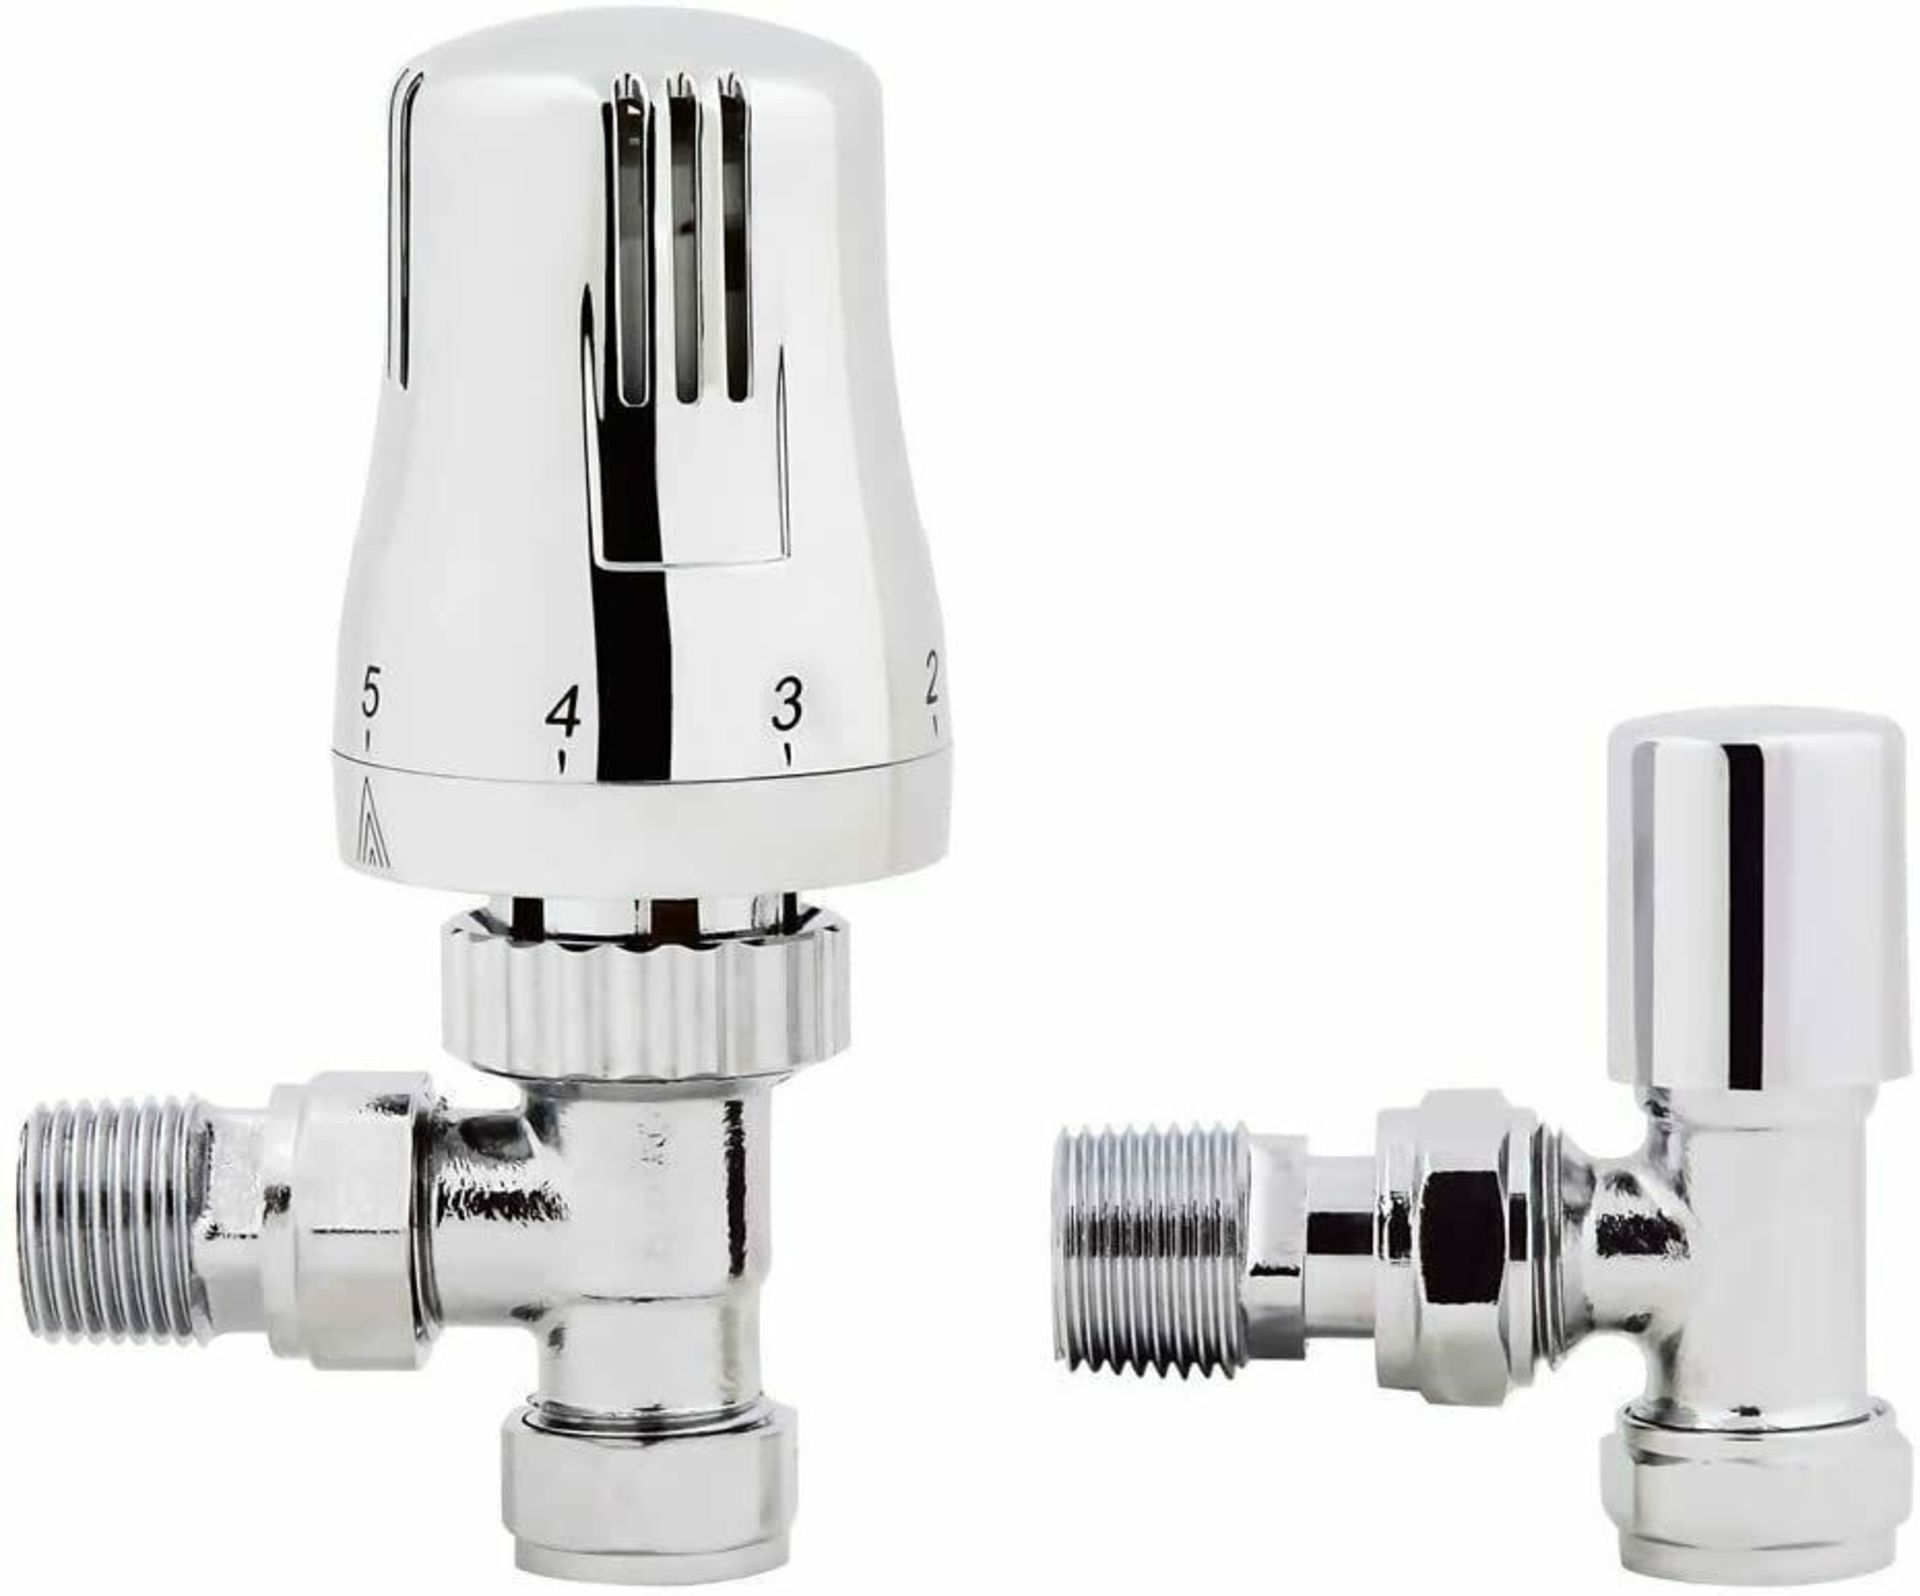 NEW & BOXED Chrome Thermostatic Control Angled Designer Radiator Valves Pair 15mm _"" NEW. RRP ?...